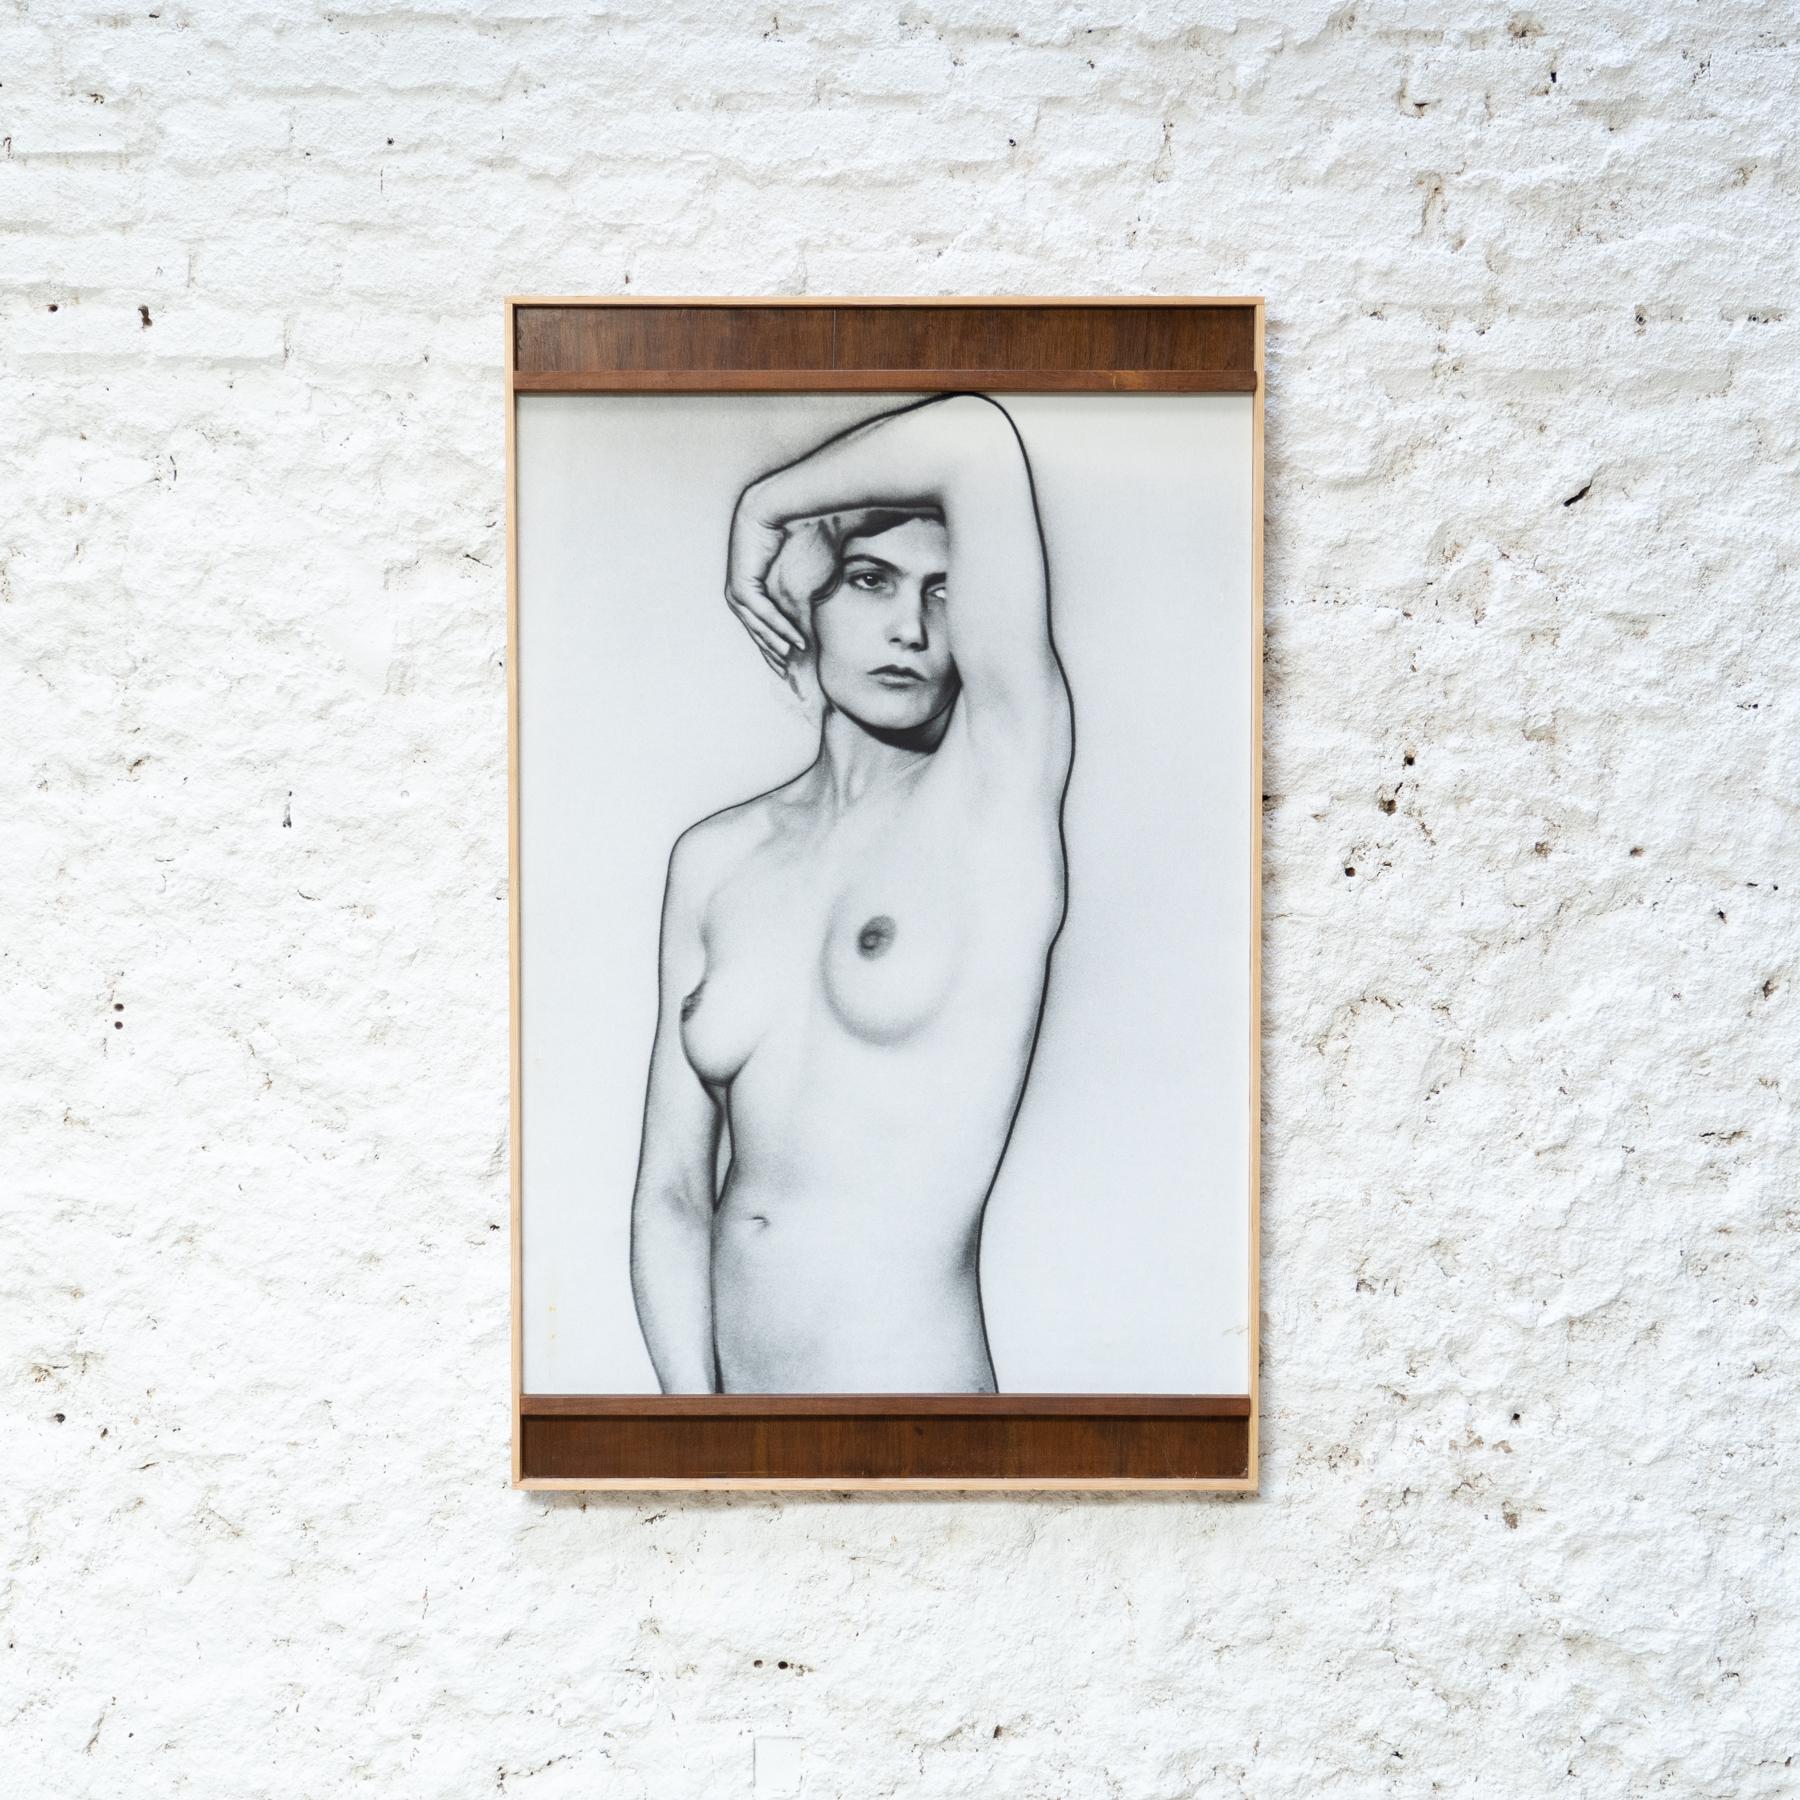 Big Size Photographic Print Framed Composition by Man Ray “Solarised Nude”

Offset Print, by unknown editor, circa 1970.

Framed Carefuly in Wood.

In original condition, with minor wear consistent of age and use, preserving a beautiful patina